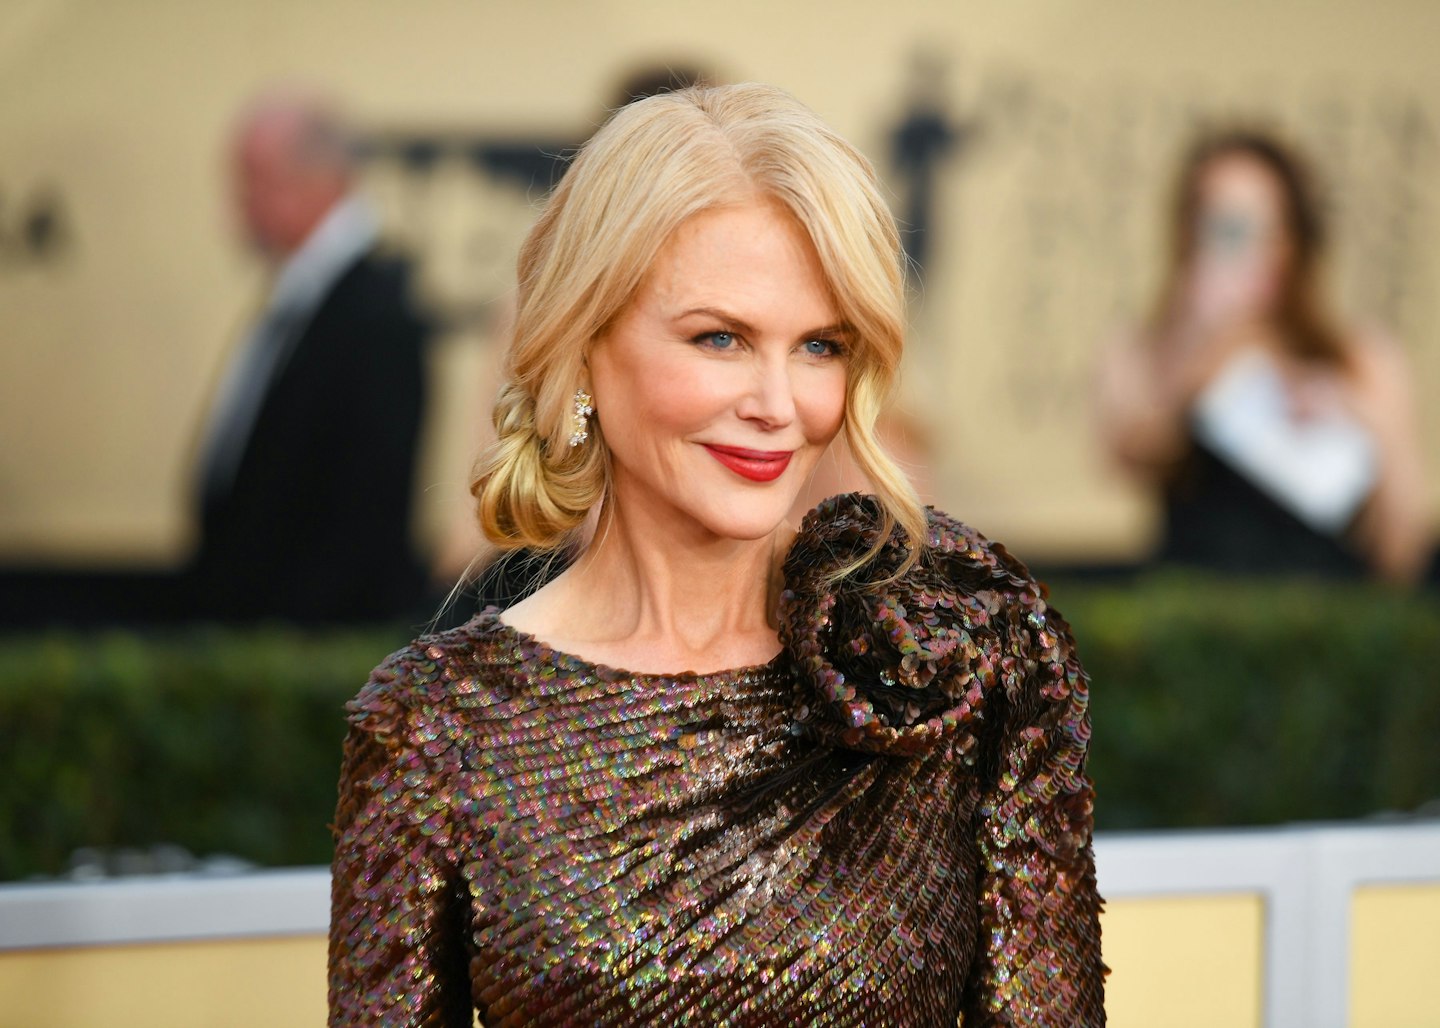 Nicole Kidman Is Unrecognisable As She Transforms For New Film 